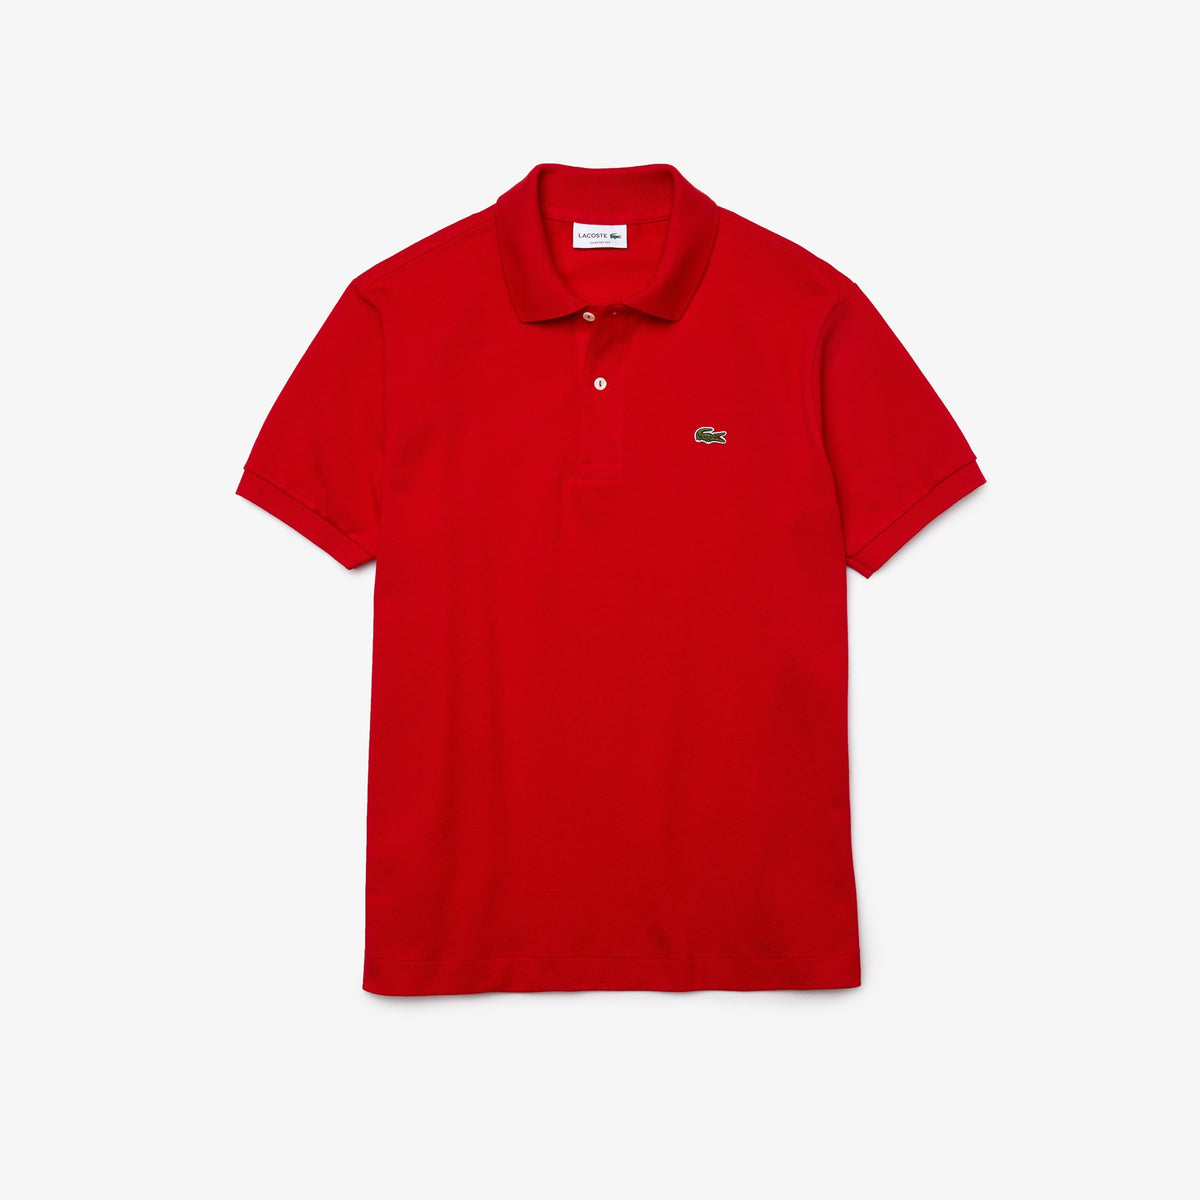 Men's Classic Fit L.12.12 Polo - Red